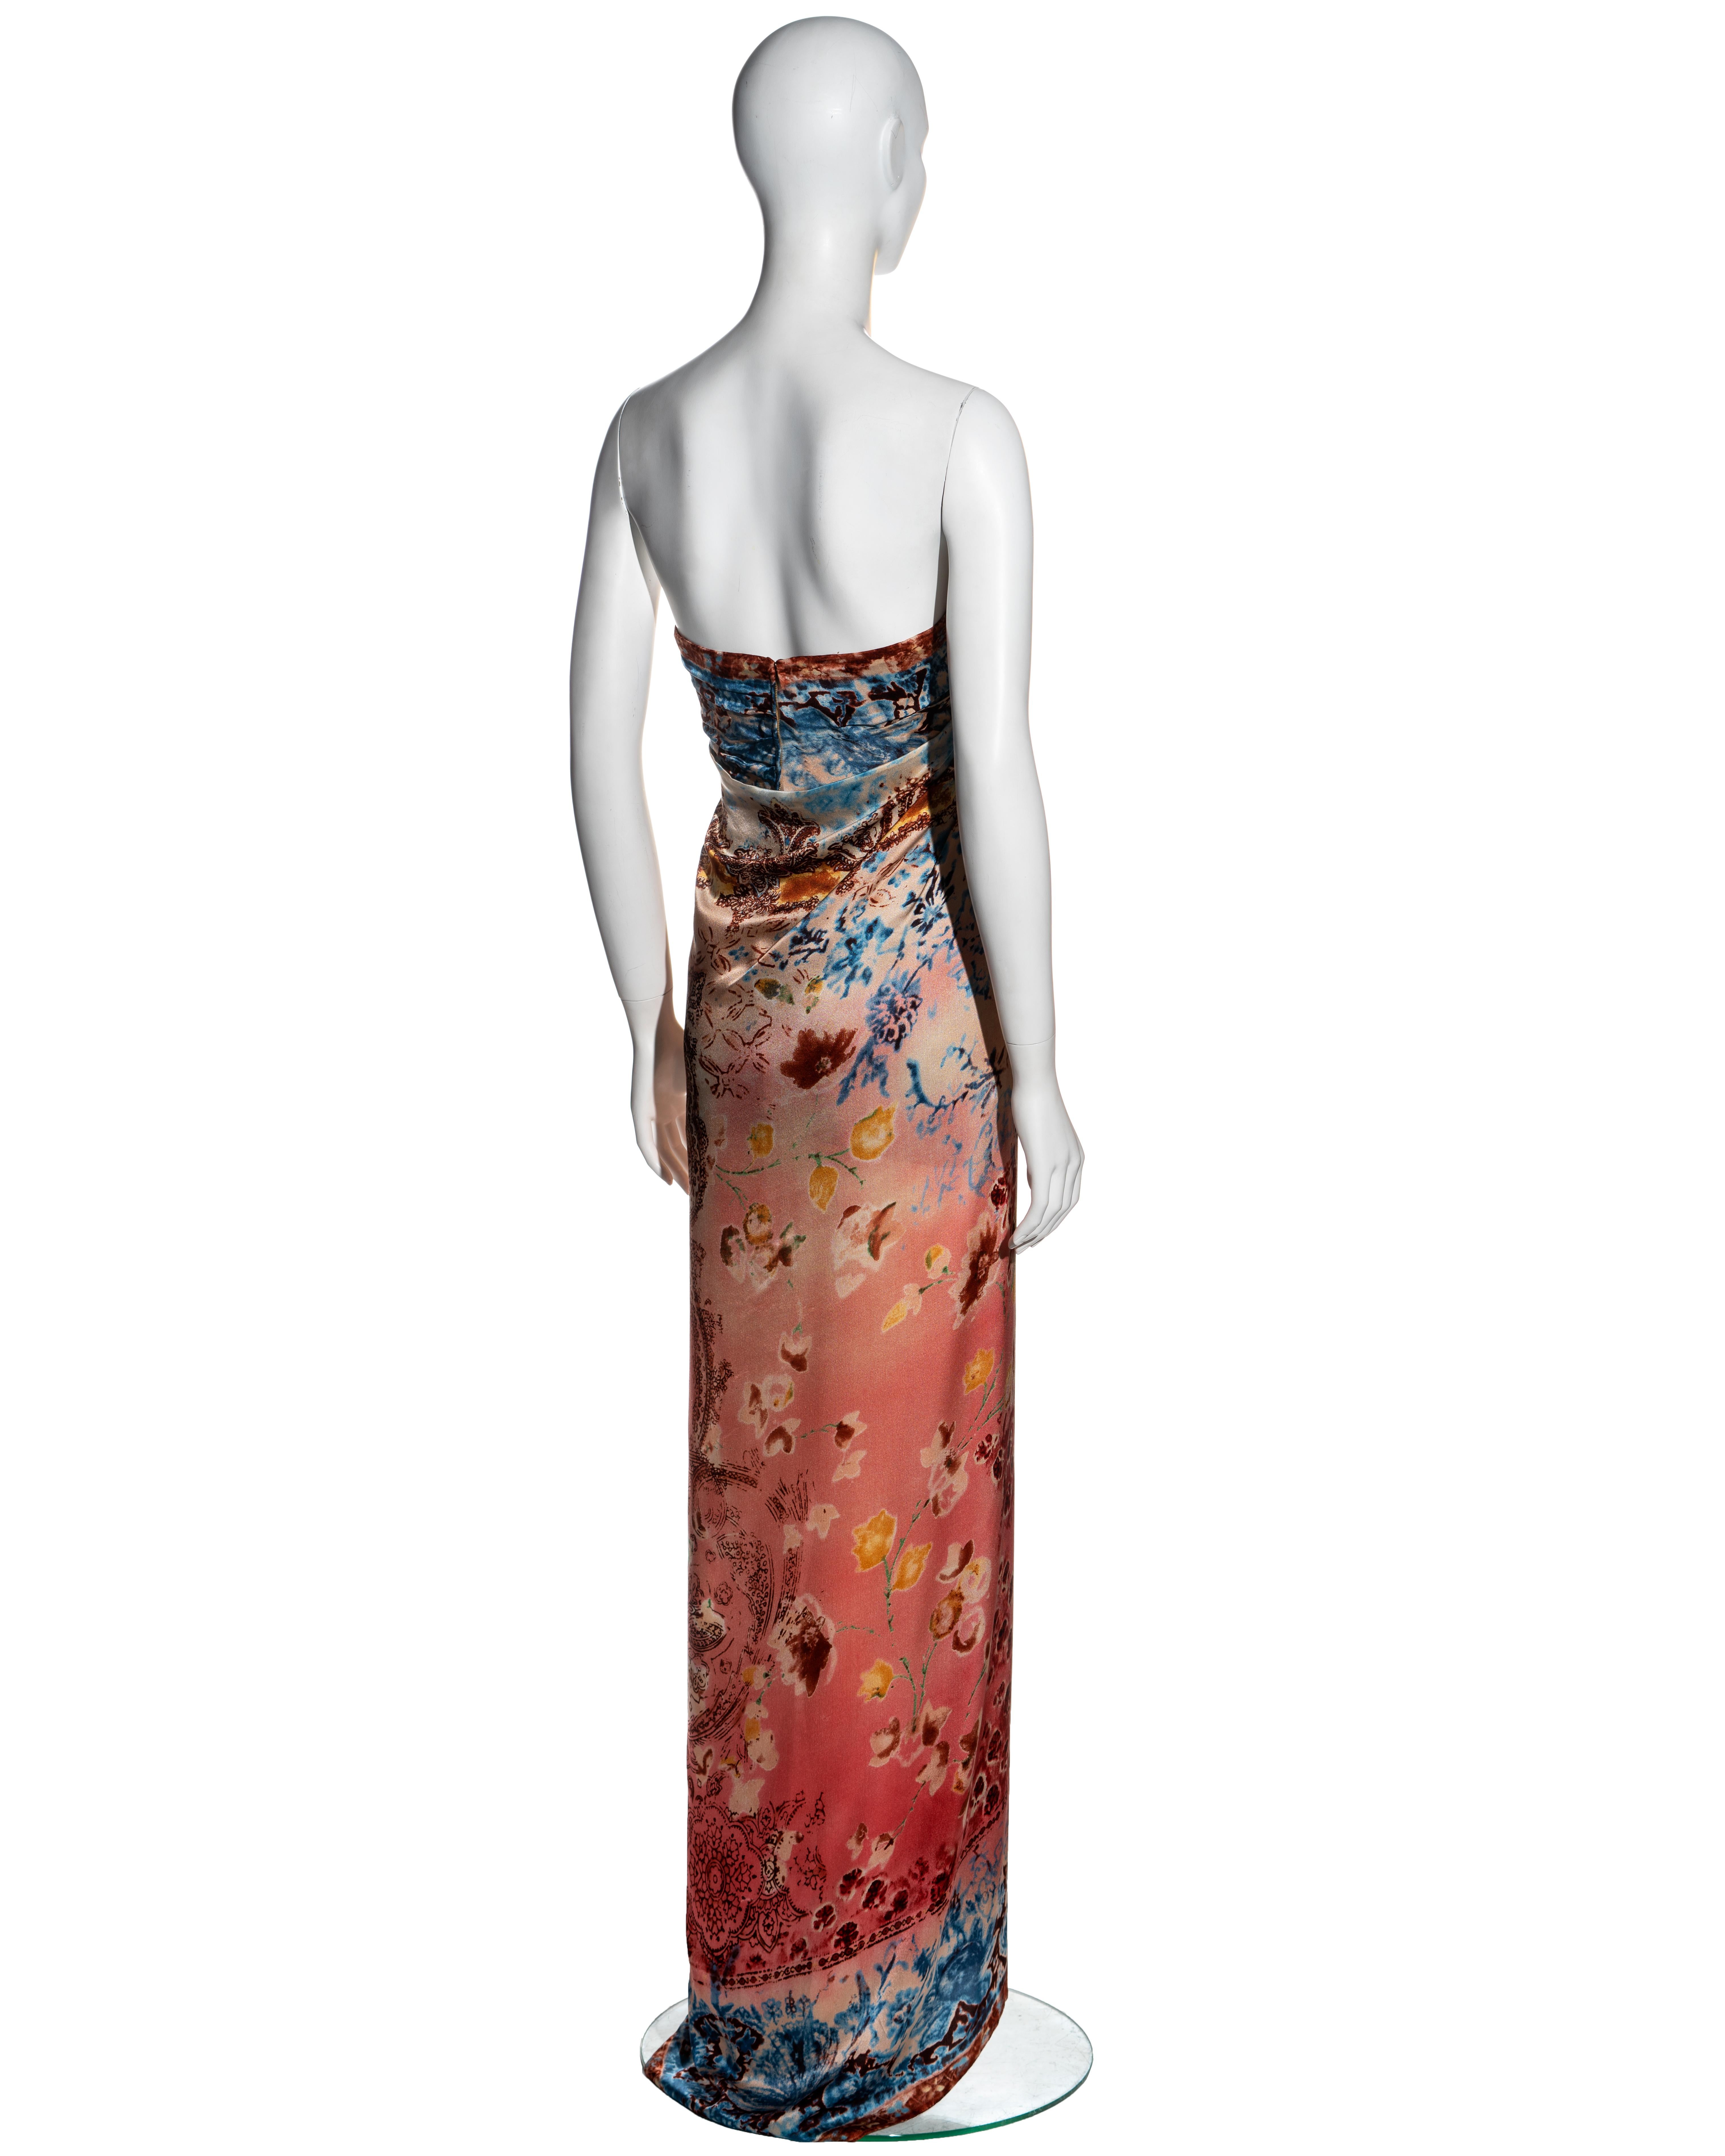 Emanuel Ungaro Couture silk strapless sarong style evening wrap dress, ss 2002 2